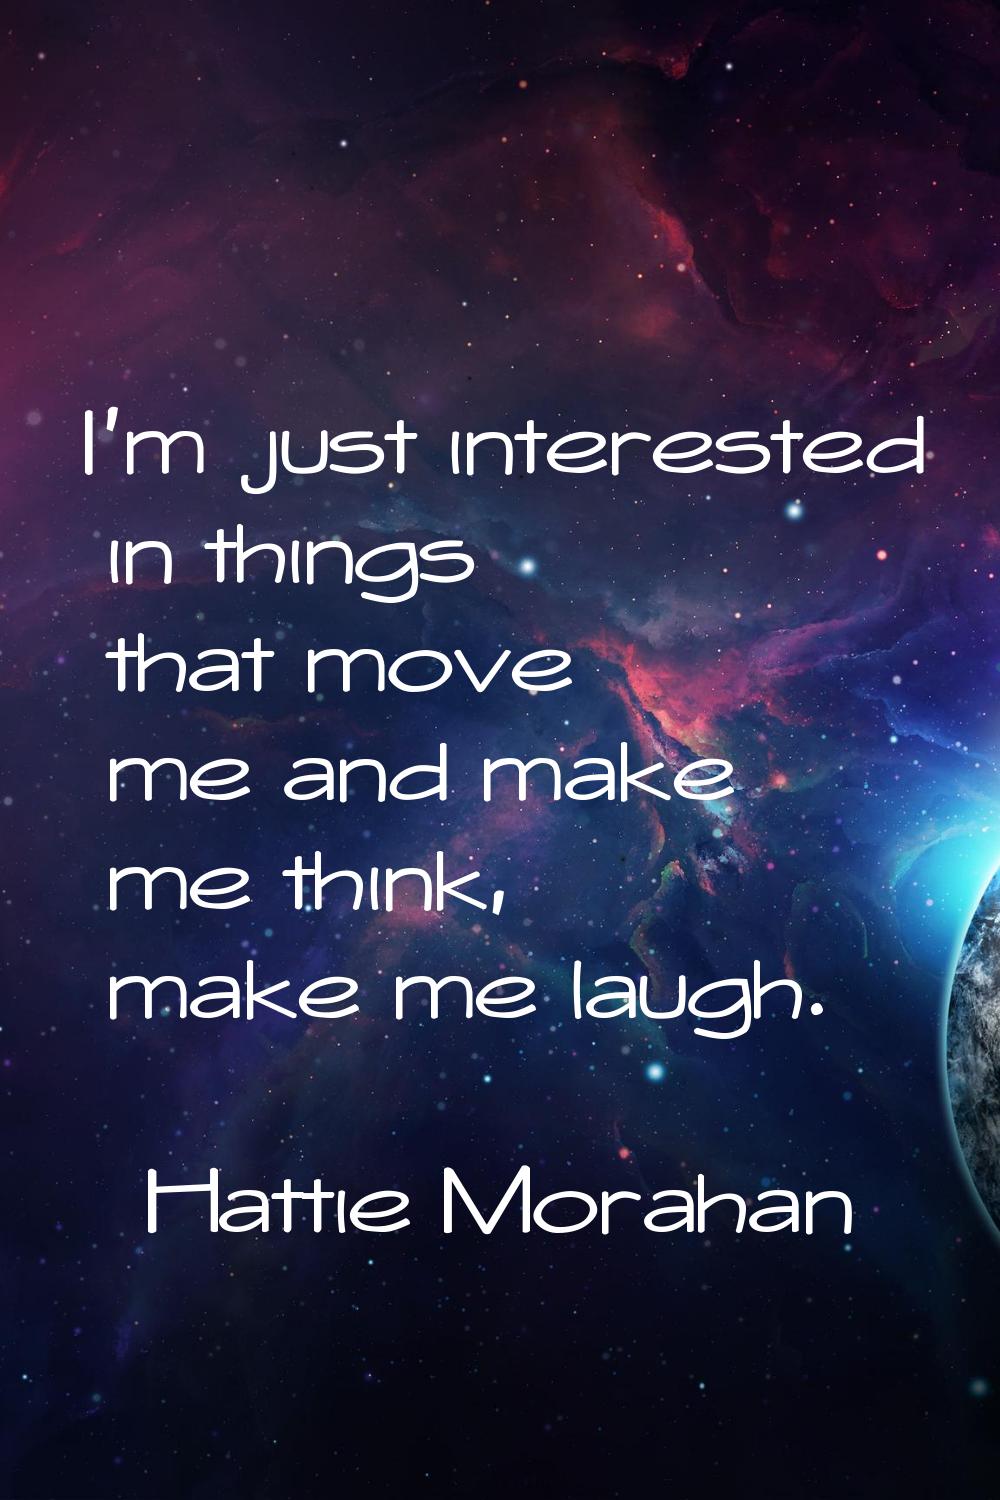 I'm just interested in things that move me and make me think, make me laugh.